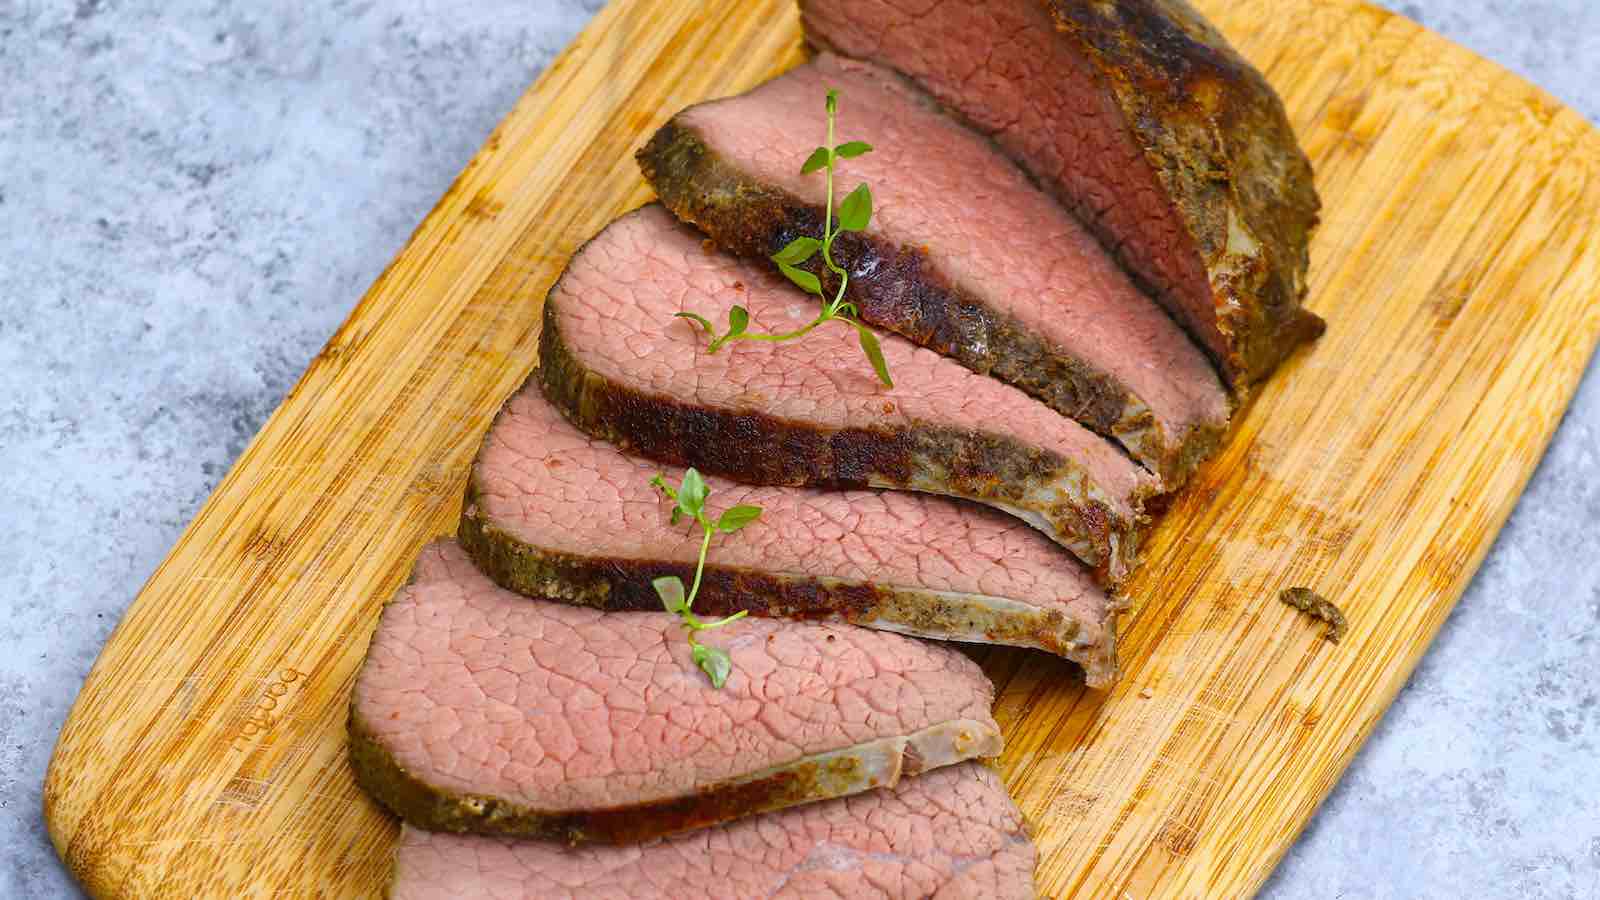 Sous Vide Eye of Round is the best way to cook this affordable beef cut, turning it into the most tender and juicy roast! This 16-hour low and slow sous vide method transforms the tough cut into a delicious eye of round roast that’s perfectly moist from edge to edge. Great for a festive holiday meal on a budget!